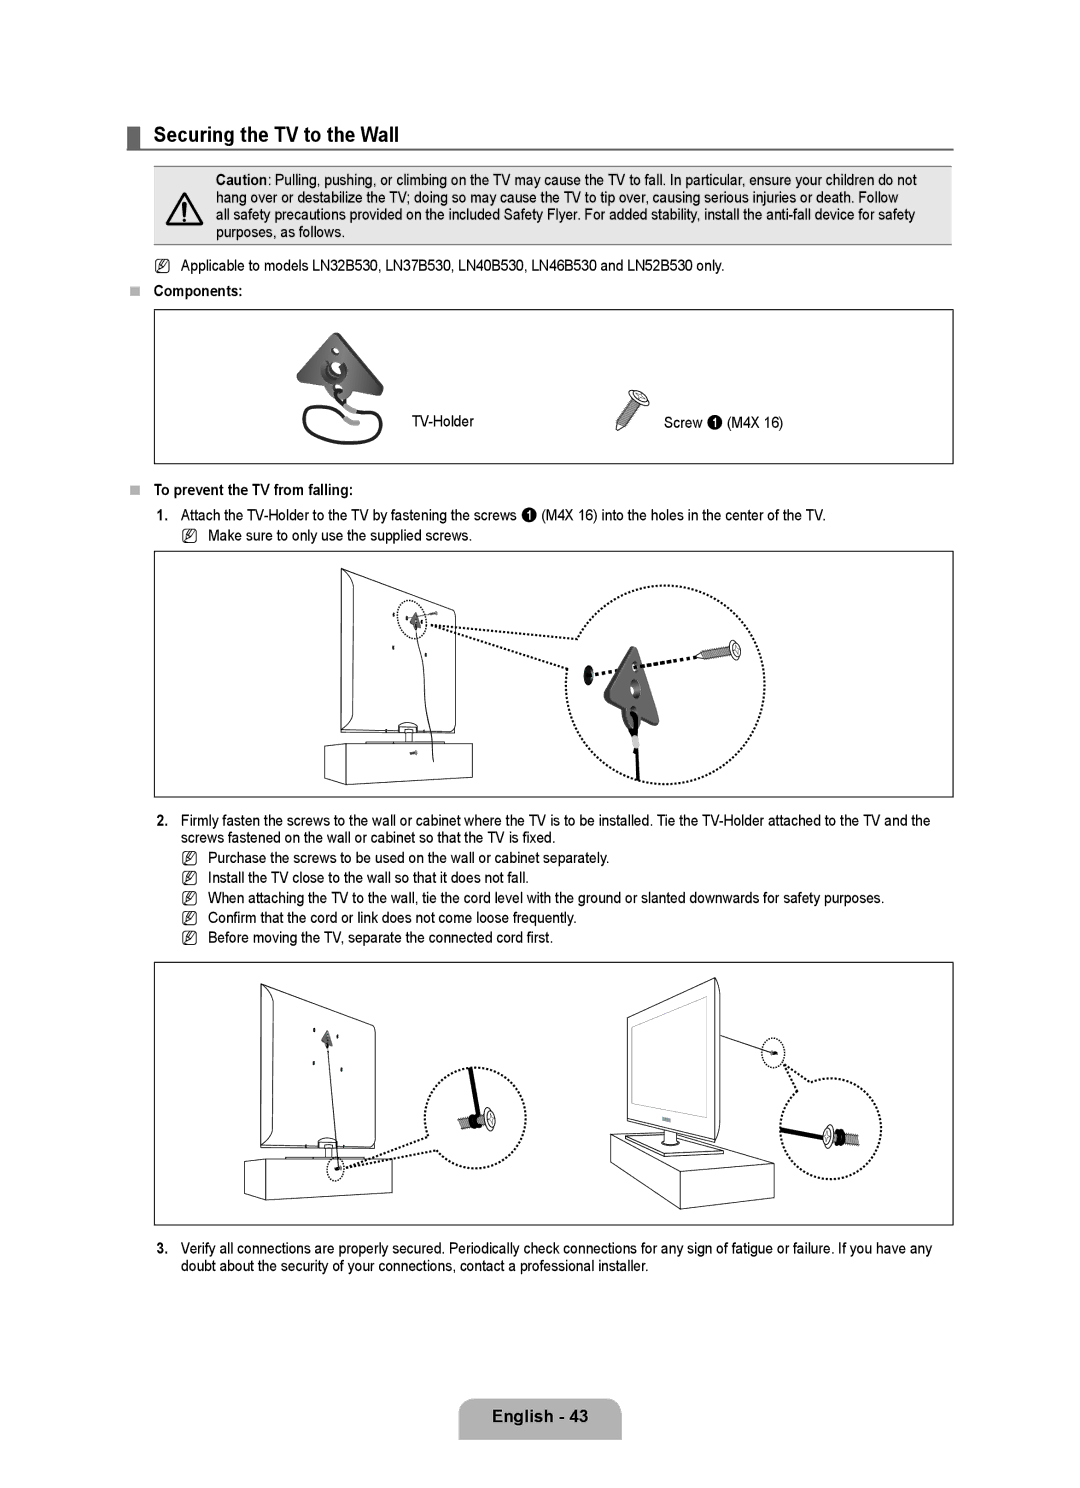 Samsung LN46B530, LN52B530, LN40B530 Securing the TV to the Wall,  Components, TV-Holder,  To prevent the TV from falling 